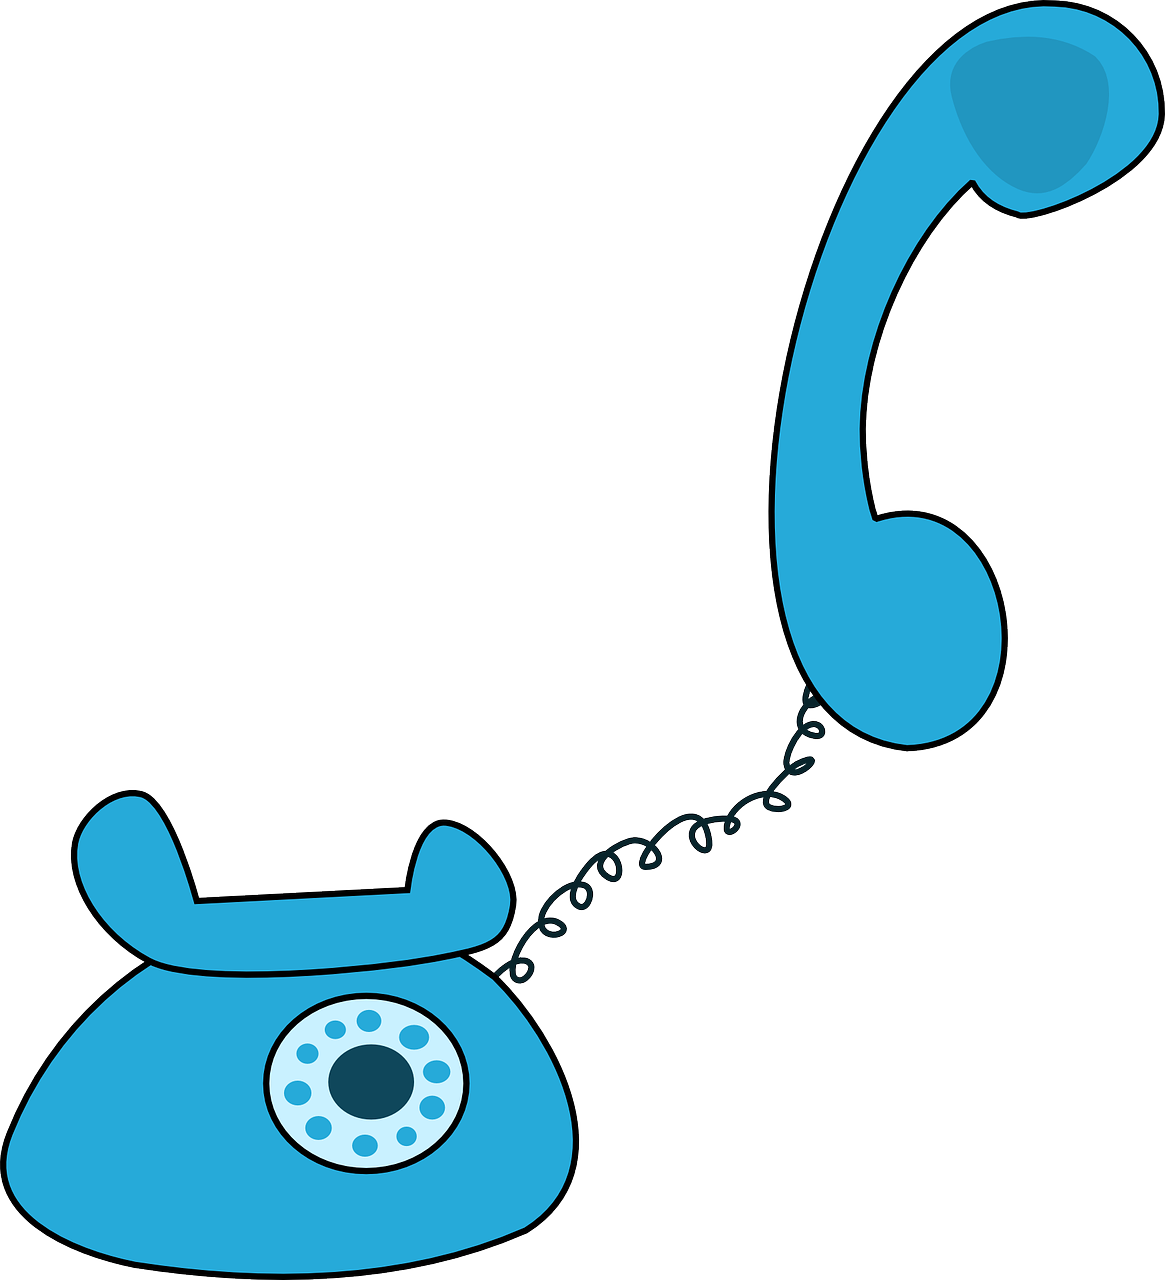 Telephone free to use cliparts